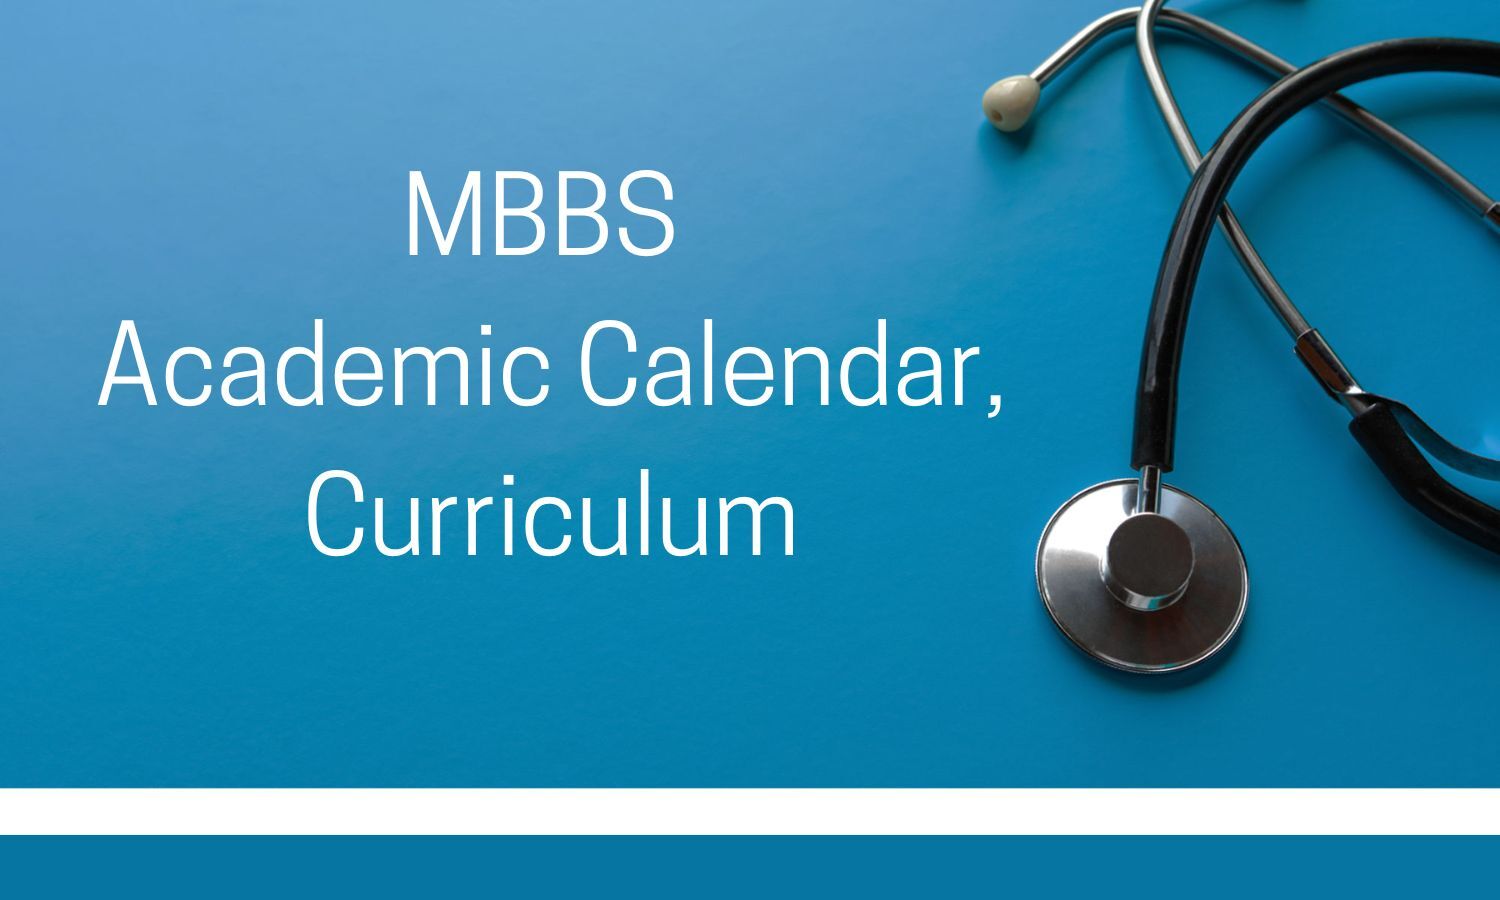 nmc-issues-updated-phase-wise-academic-calendar-curriculum-for-2022-23-mbbs-batch-check-out